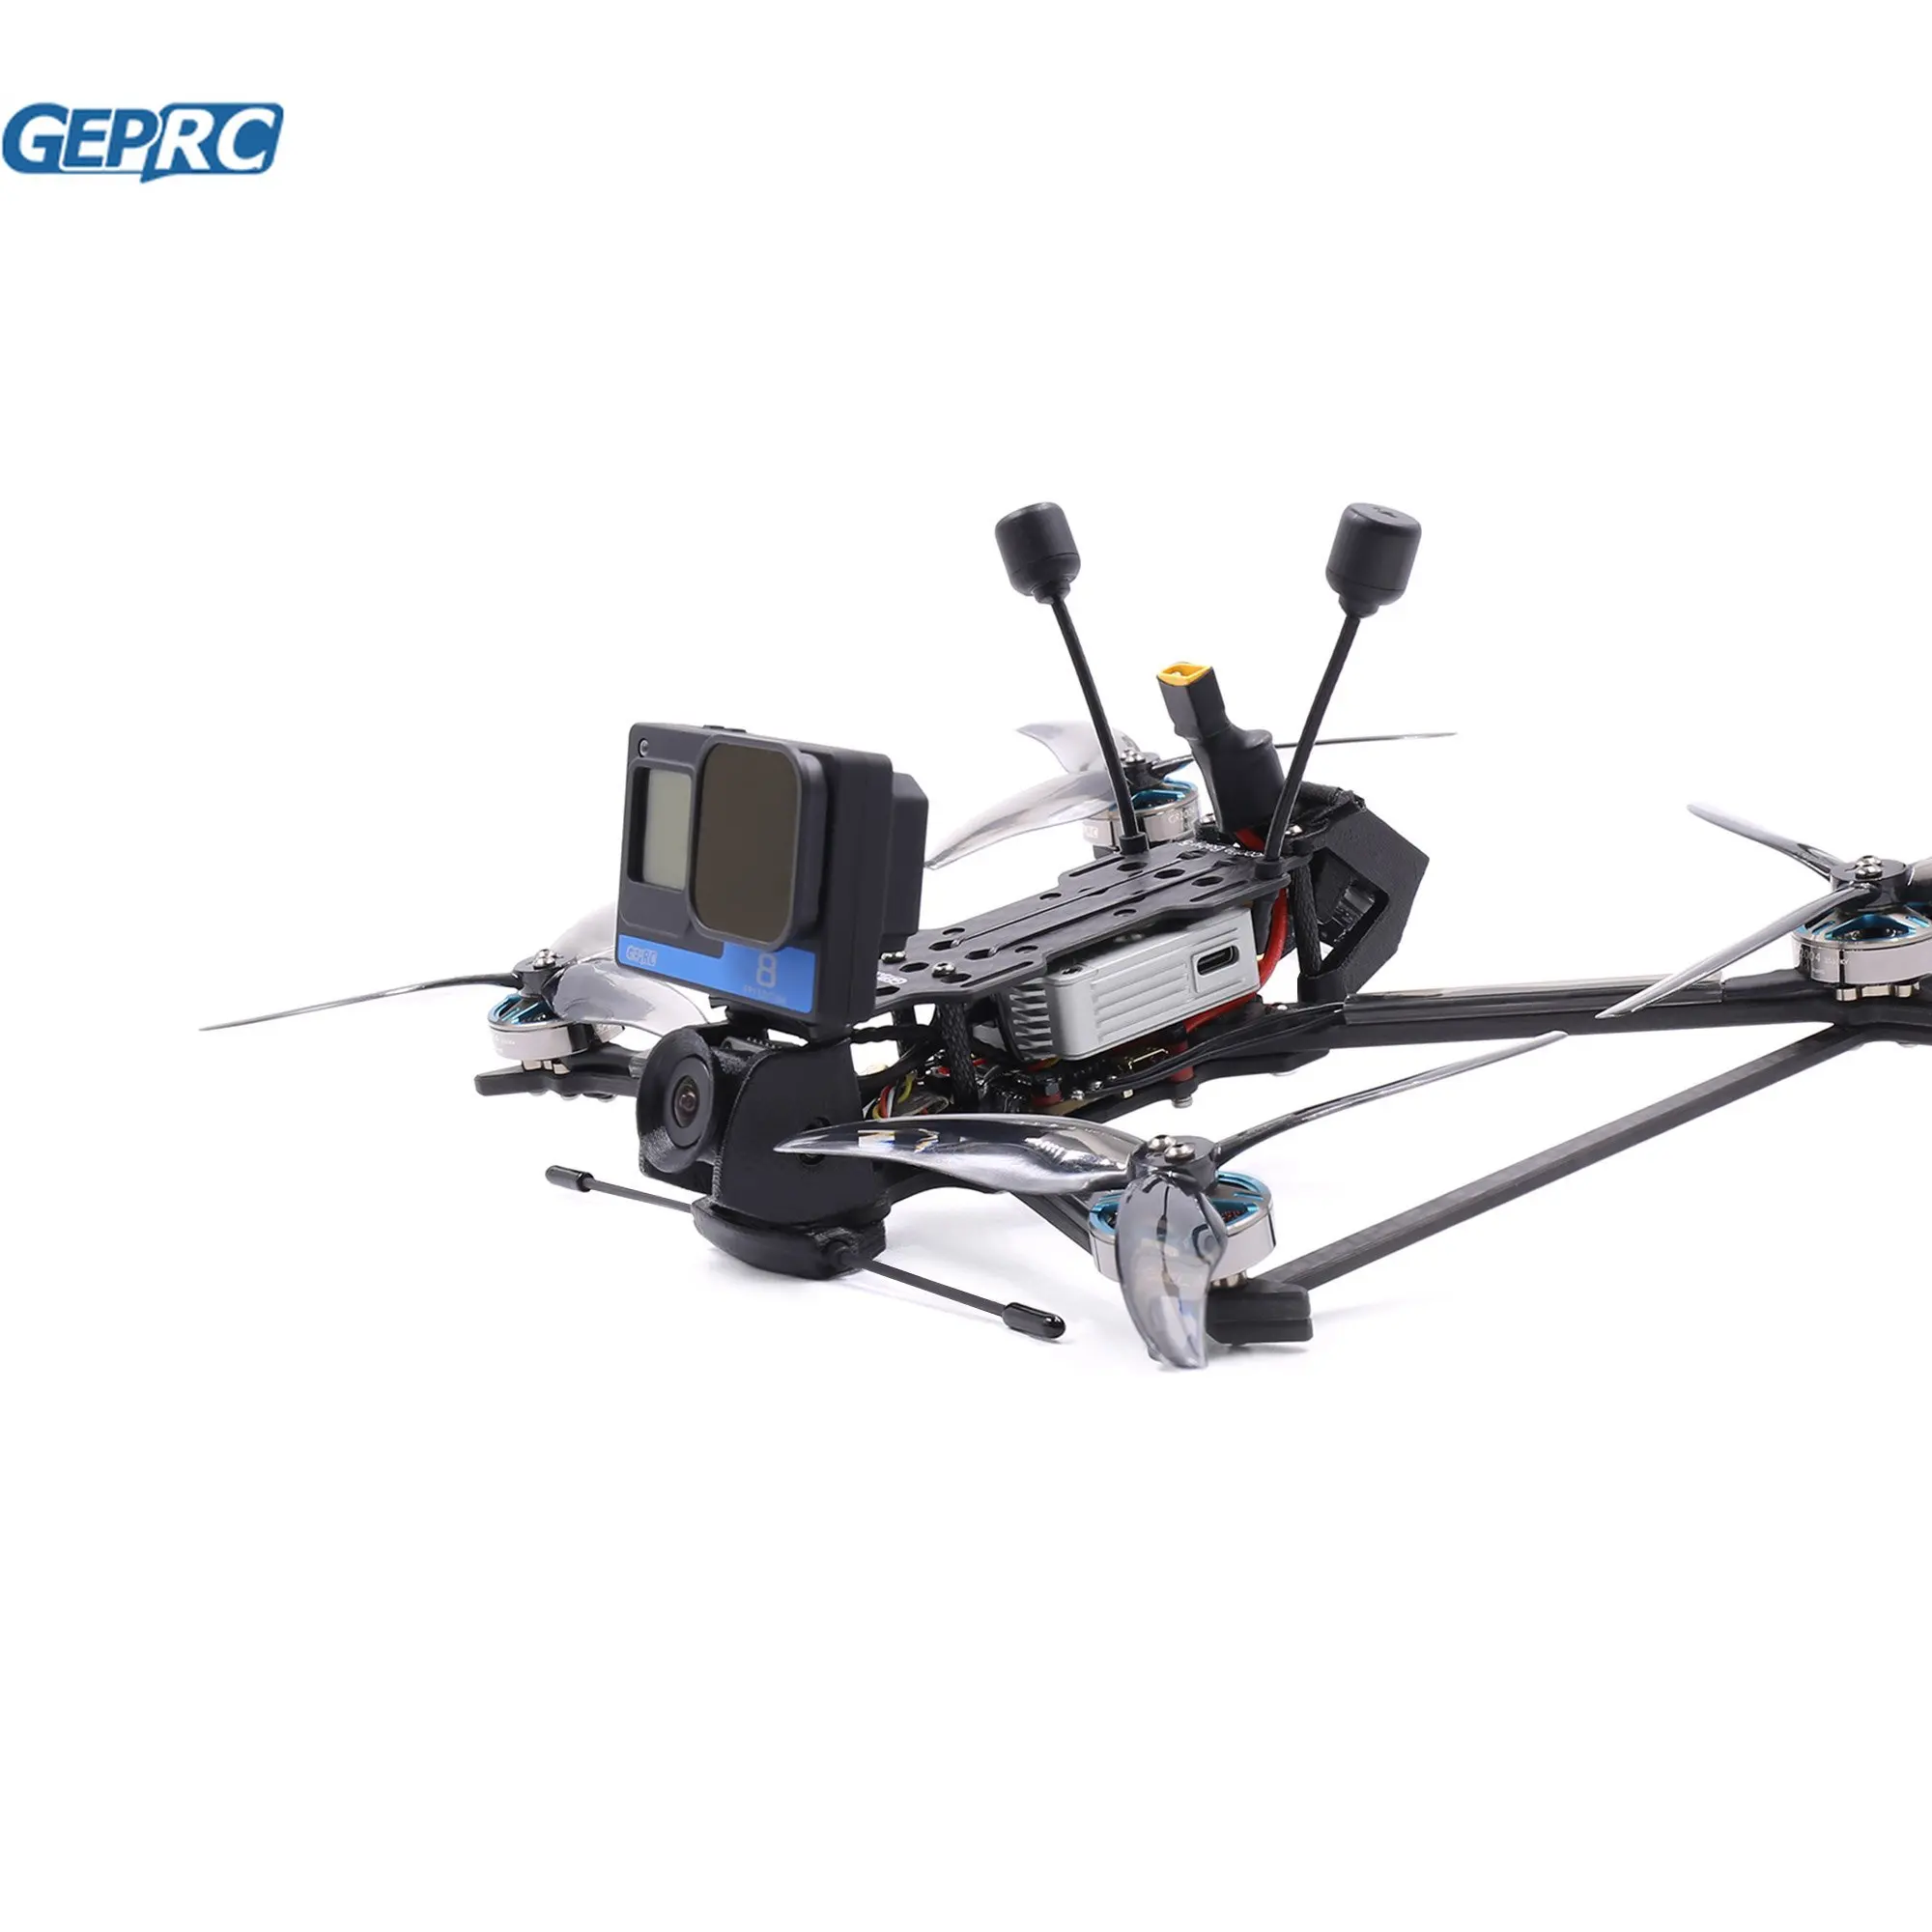 GEPRC Crocodile5 Baby LR HD LongRange FPV 4S 5 Inch DJI Air Unit Digital System For RC FPV Quadcopter LongRange Freestyle Drone fpv system combo hd camera with 5 8g transmitter and 4 3 inch fpv monitor receiver kit rtr for rc aircraft glider rc car